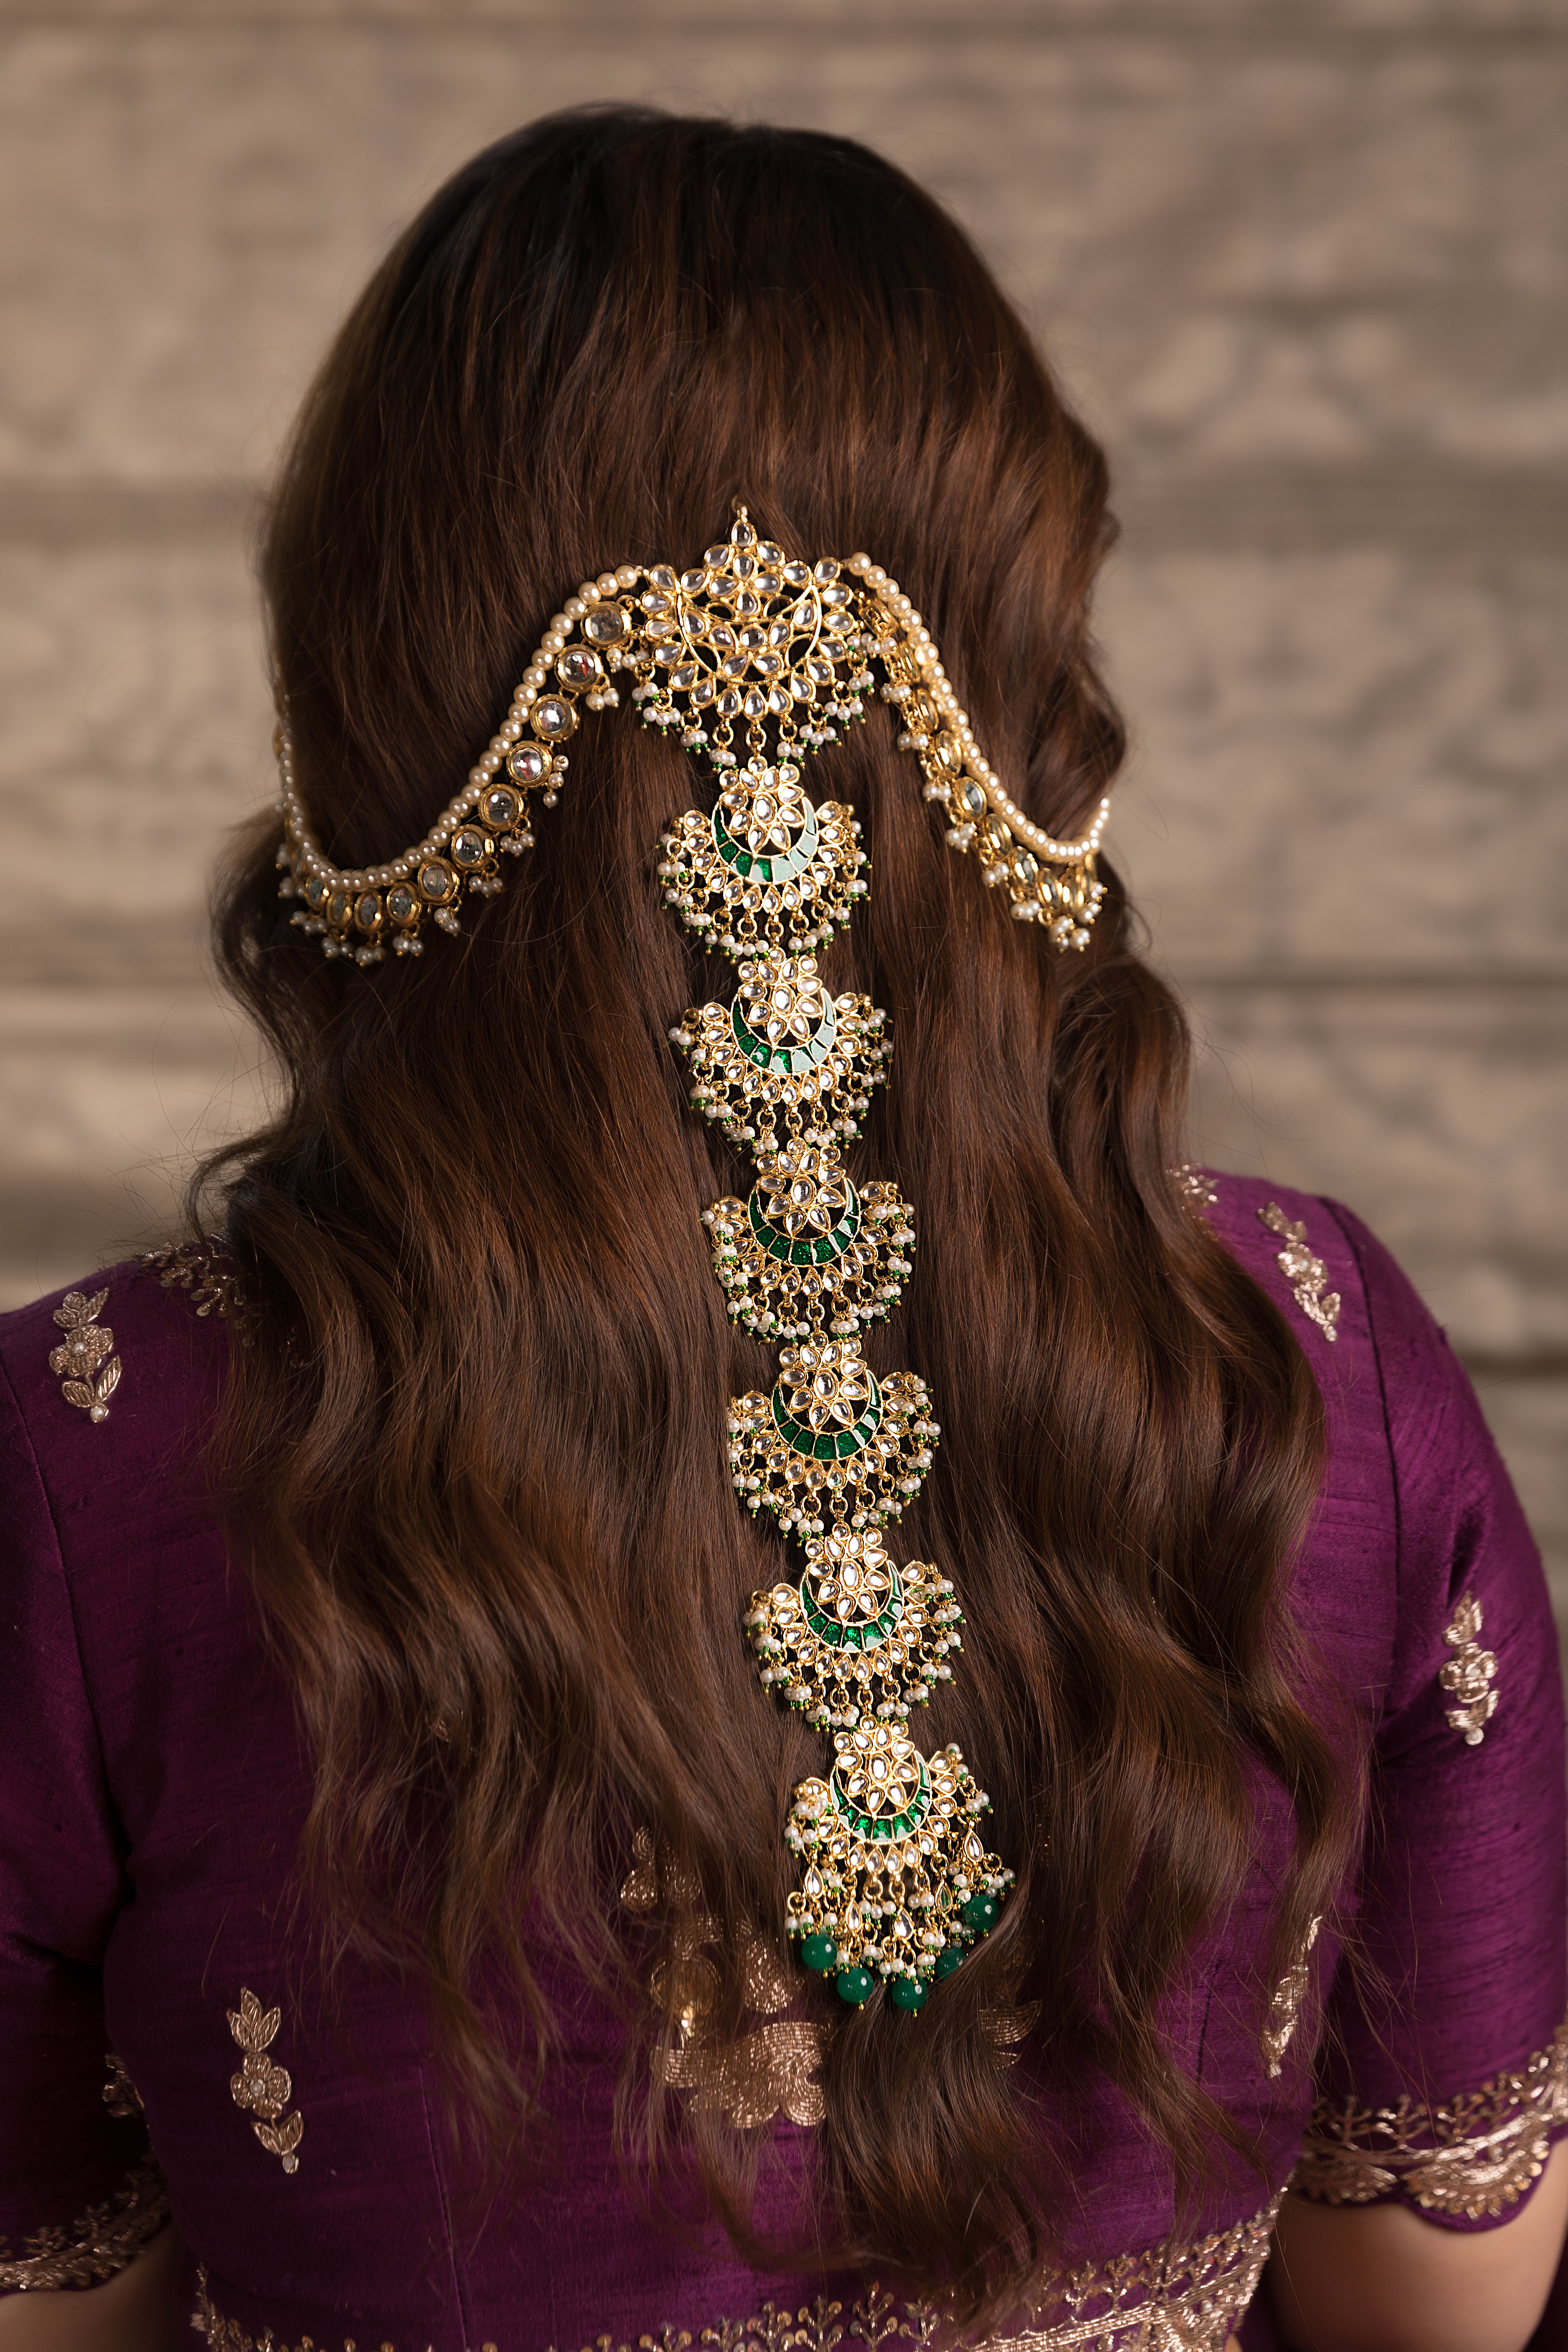 7 Arabic Hairstyles For Long Hair That Will Change Your Look